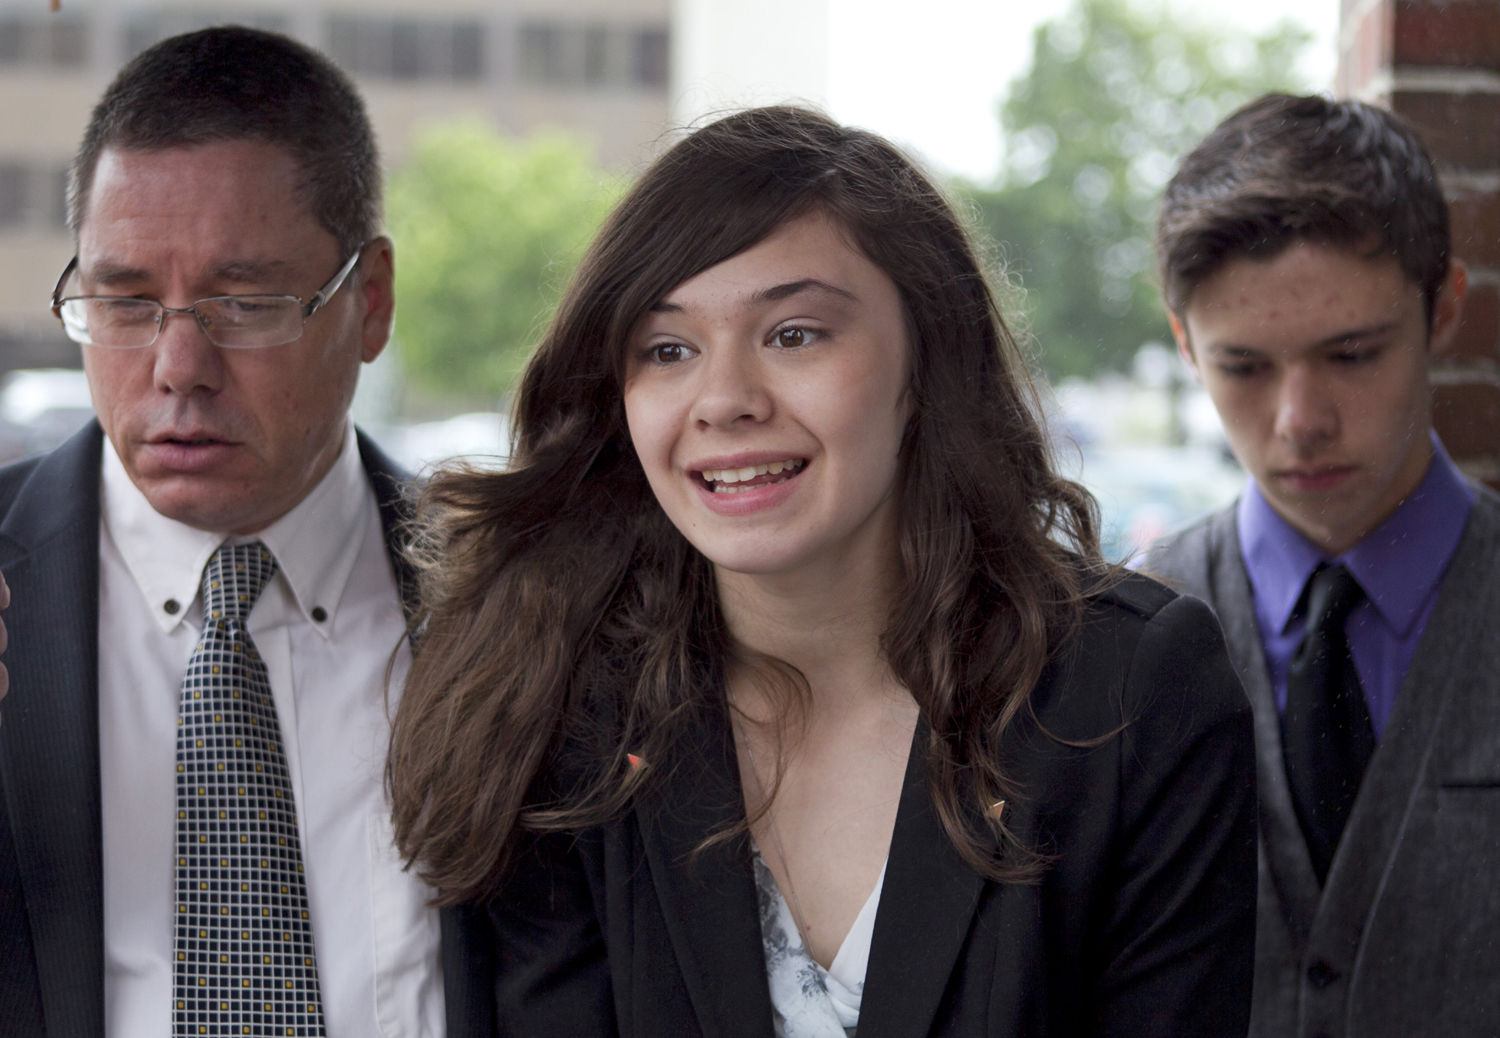 In this file photo, transgender student Nicole Maines, center, speaks to reporters as her father Wayne Maines, left, and brother Jonas, look on outside the Penobscot Judicial Center in Bangor, Maine. (Robert F. Bukaty — AP)